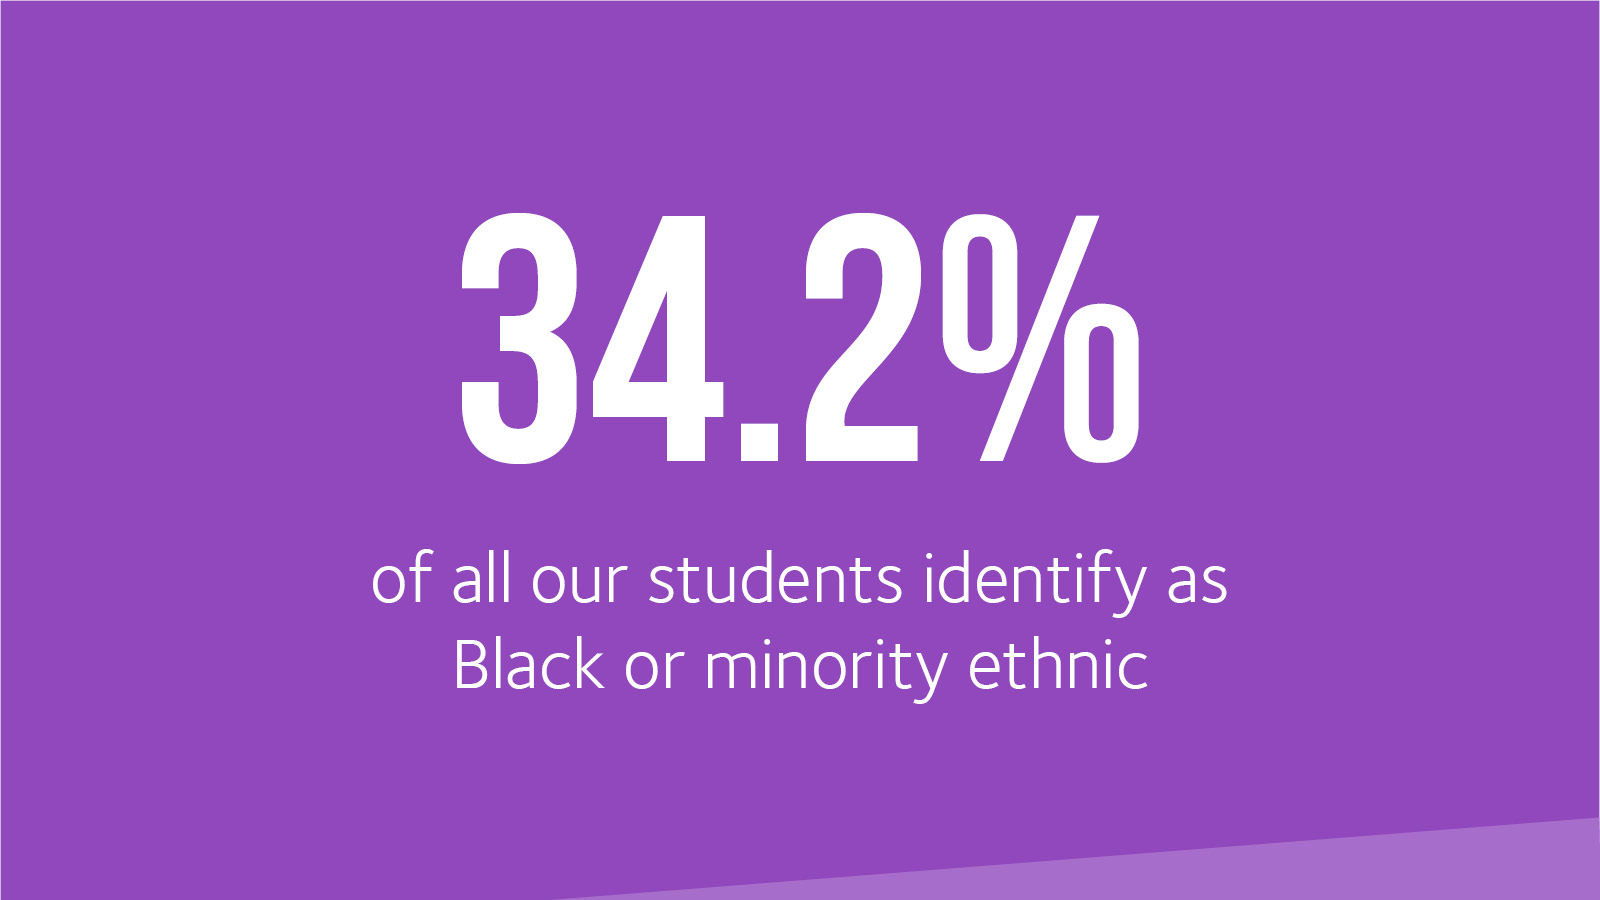 34.2% of students identify as Black or minority ethnic